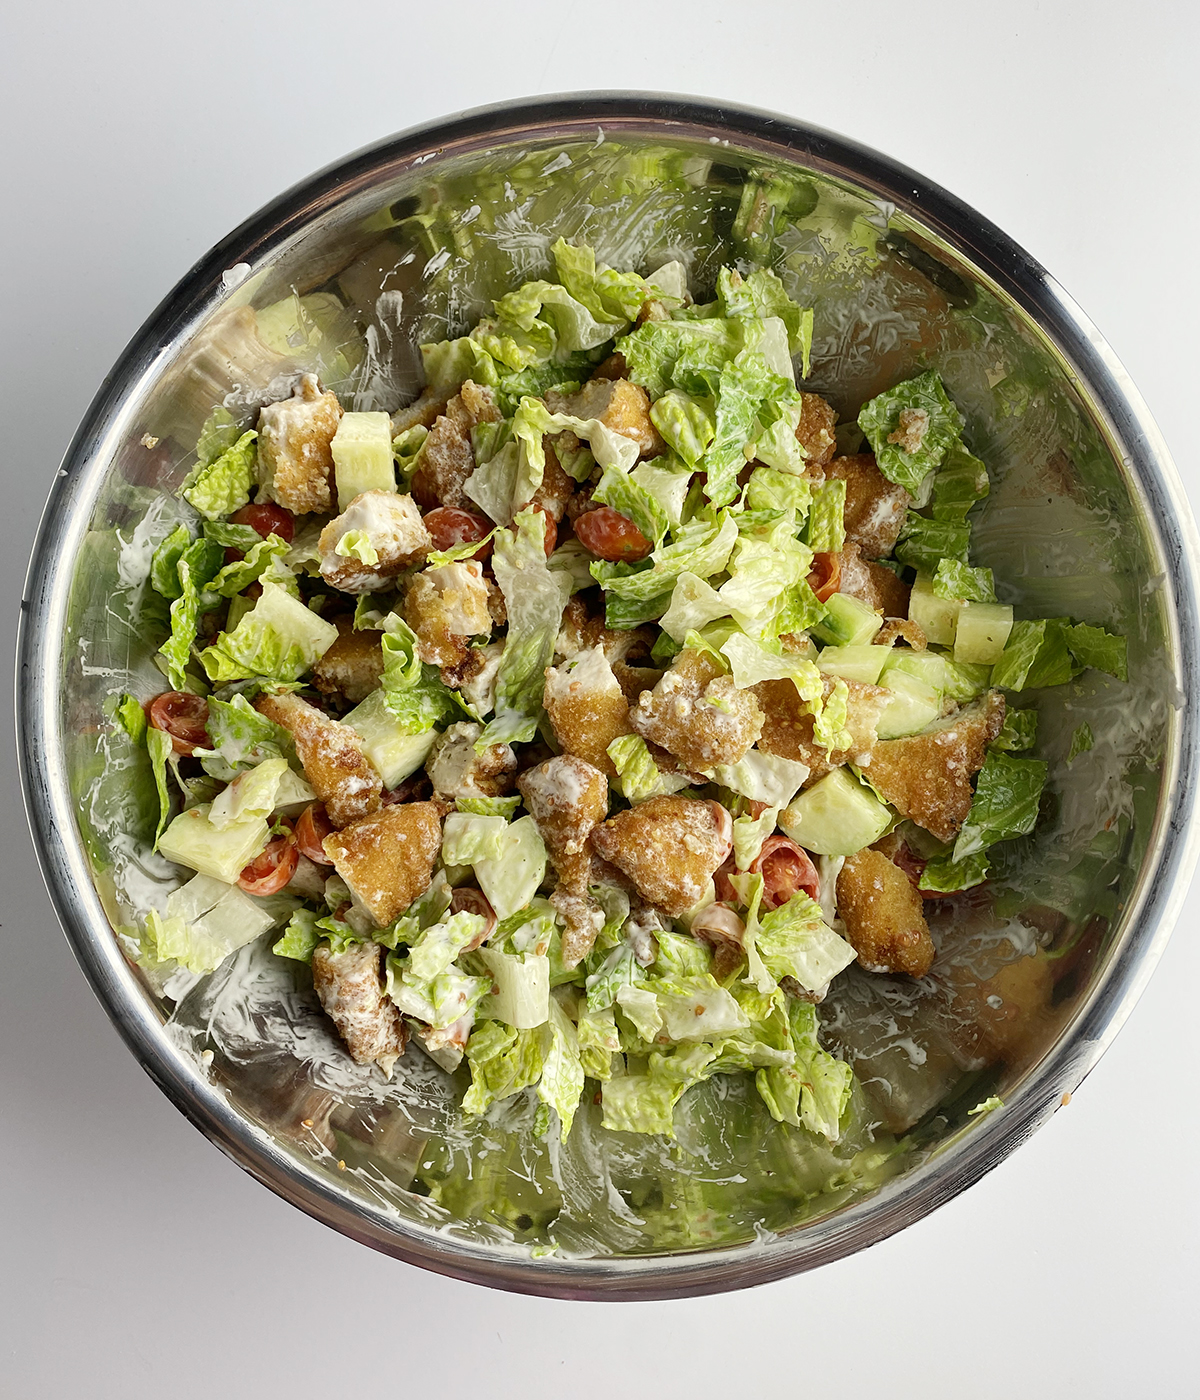 Fried chicken salad mixture in a bowl.